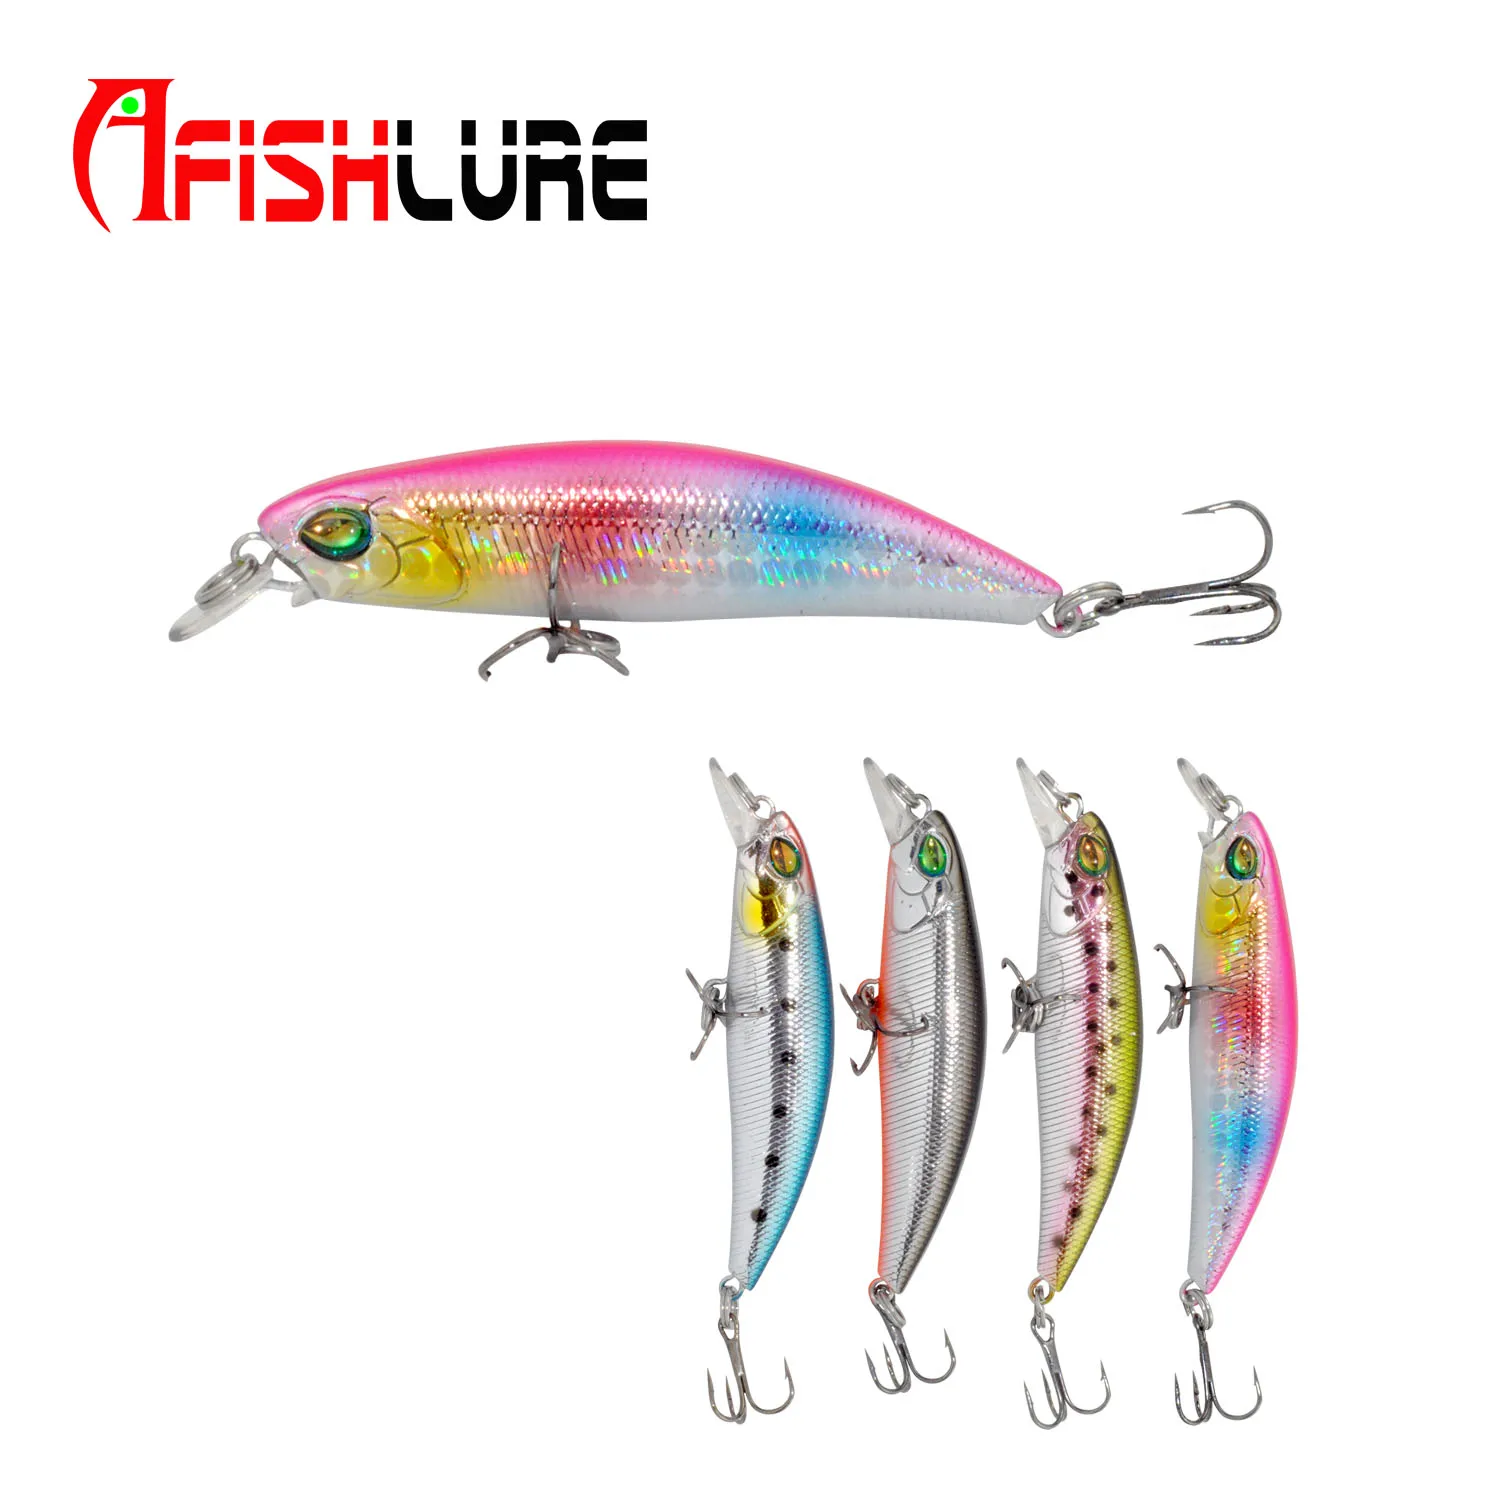 

Factory Small Sinking 1.5m Hard Minnow 60mm/5.2g Plastic Minnow Fishing Lures Peche Bass Pike Trolling Pesca Fishing Tackle, 4 colors for choice